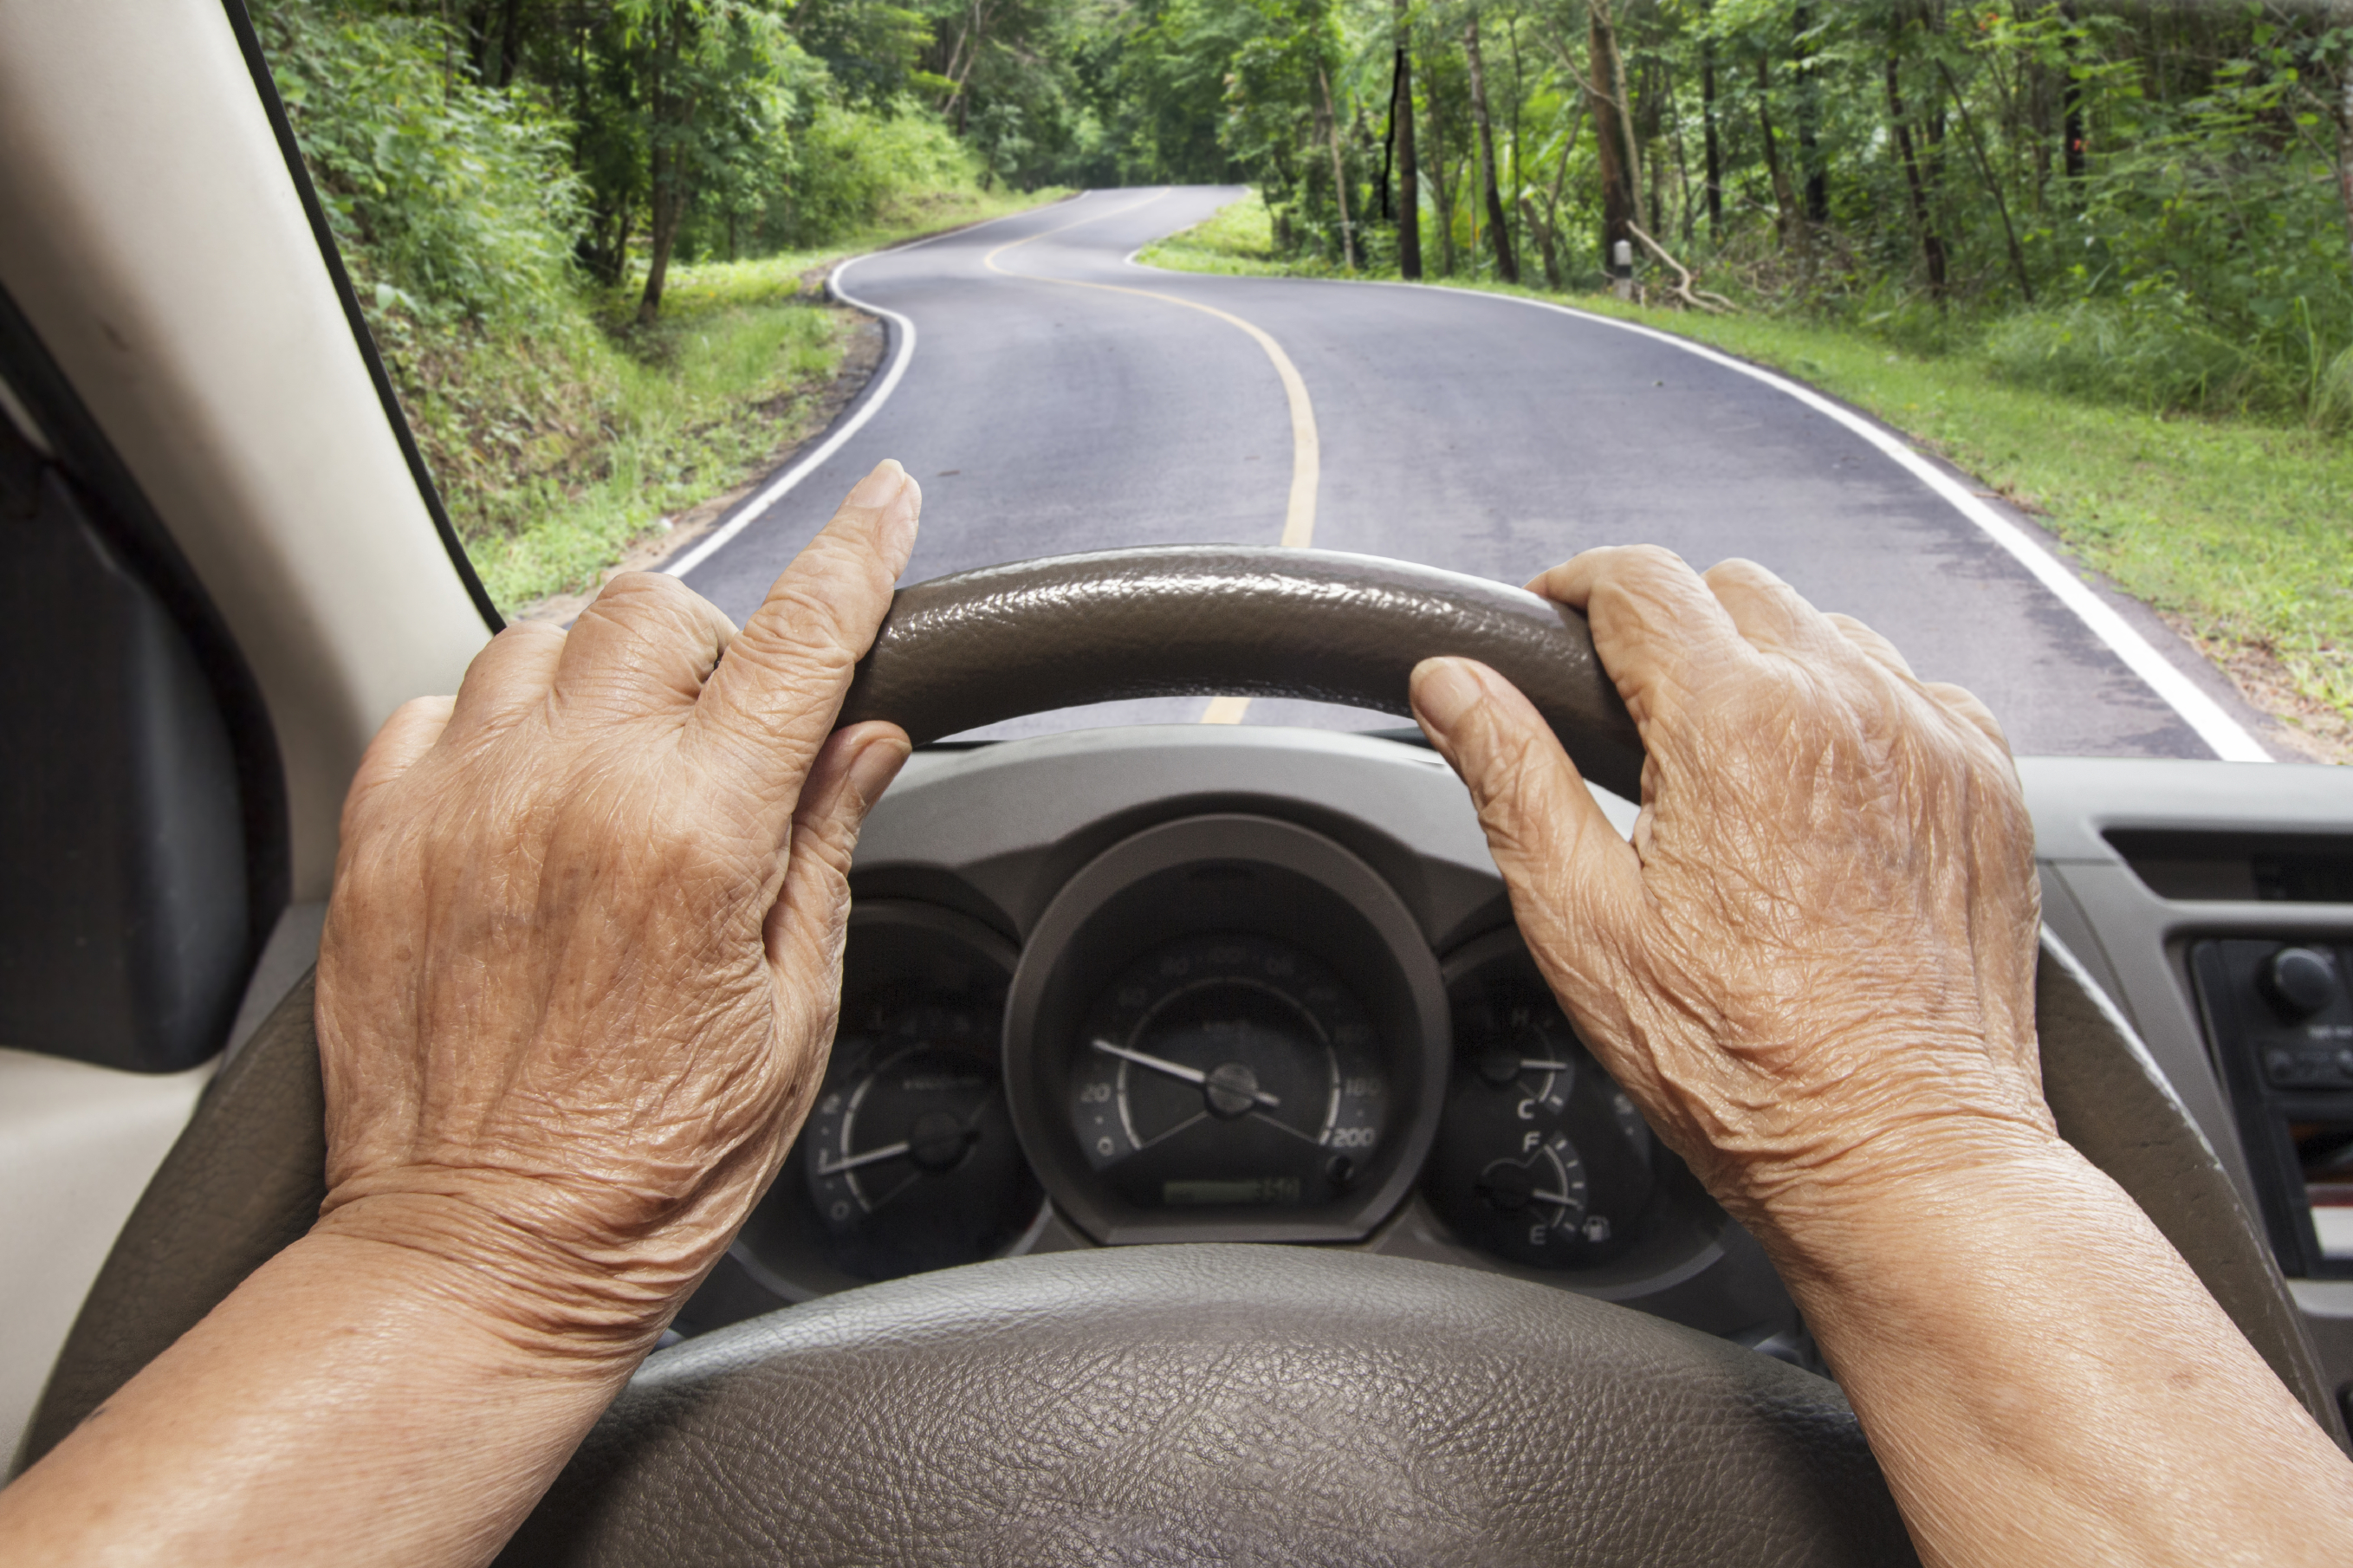 The Elderly and Driving: When Is It Time to Hit the Brakes? - The